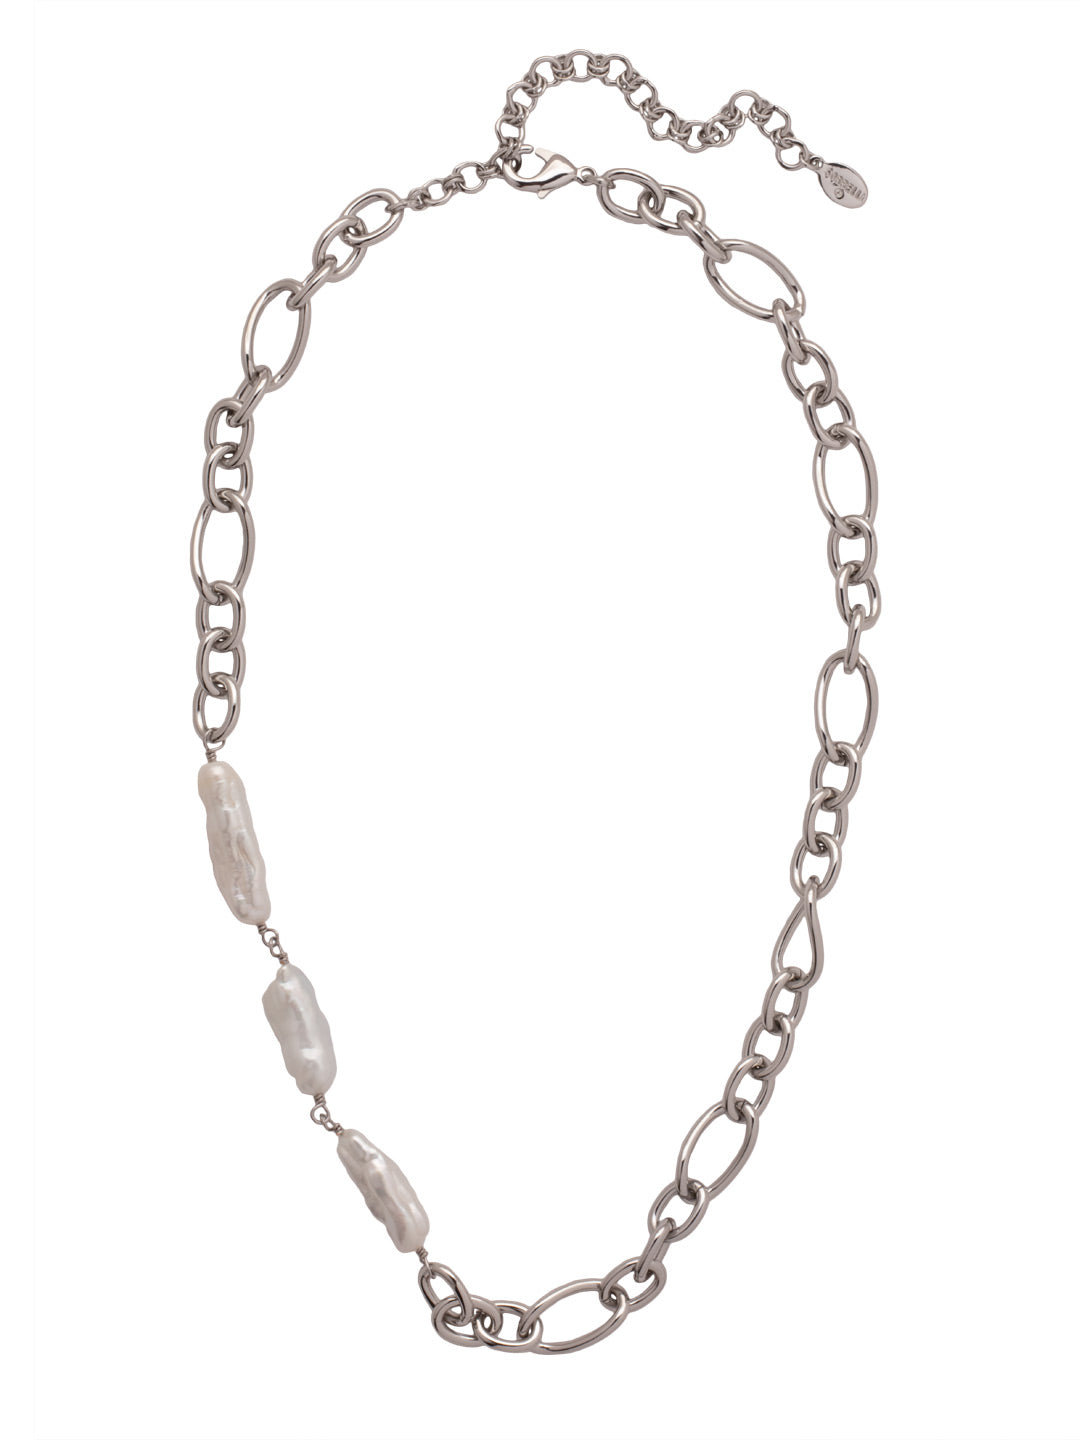 Janet Tennis Necklace - 4NFC4PDMDP - <p>The Janet Tennis Necklace features chunky assorted chain links and freshwater pearls on an adjustable chain, secured with a lobster claw clasp. From Sorrelli's Modern Pearl collection in our Palladium finish.</p>